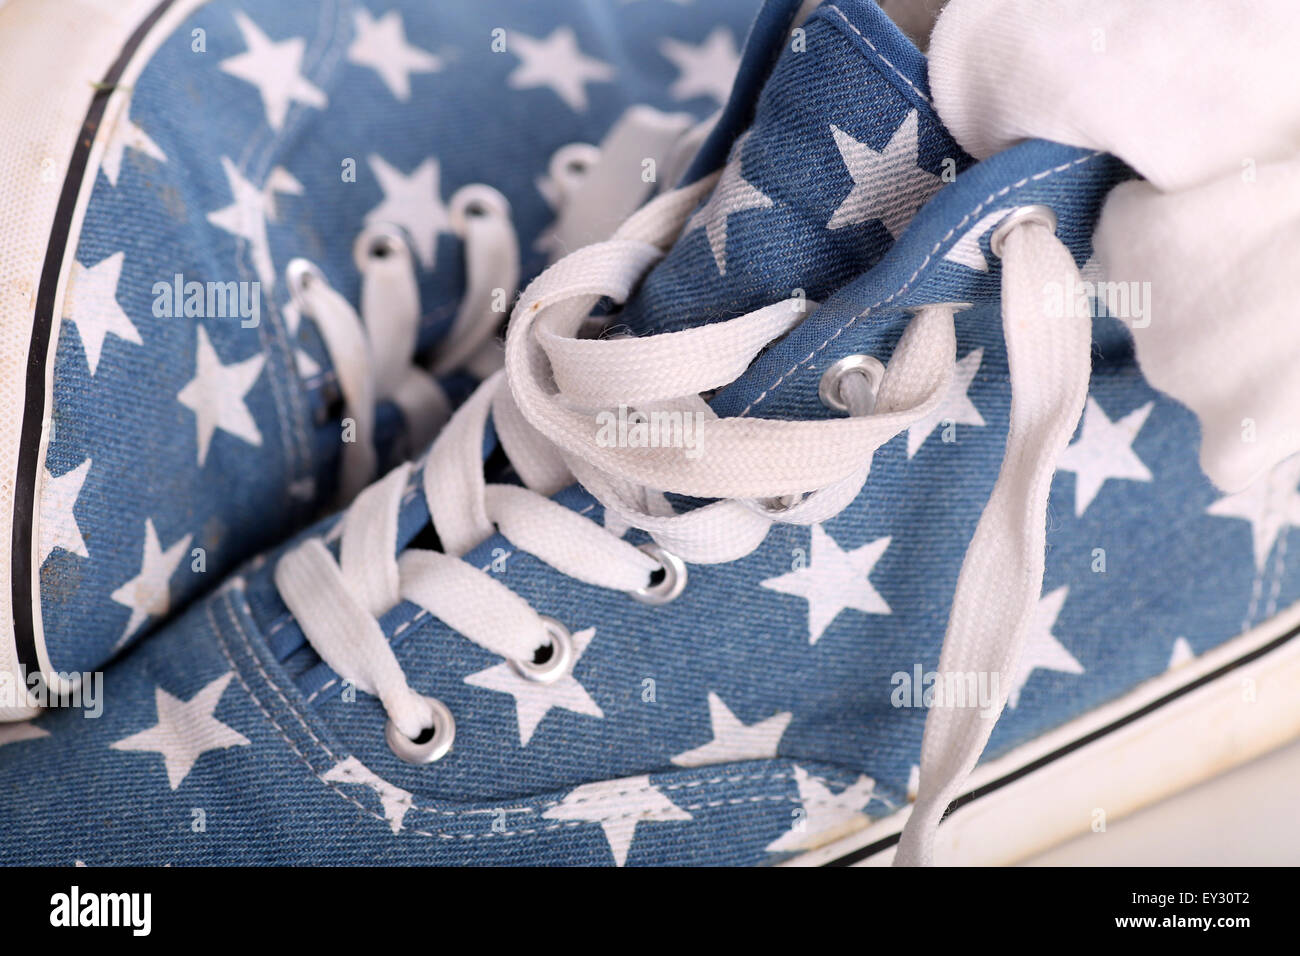 Fancy blue fake converse shoes or trainers with stars on them Stock Photo